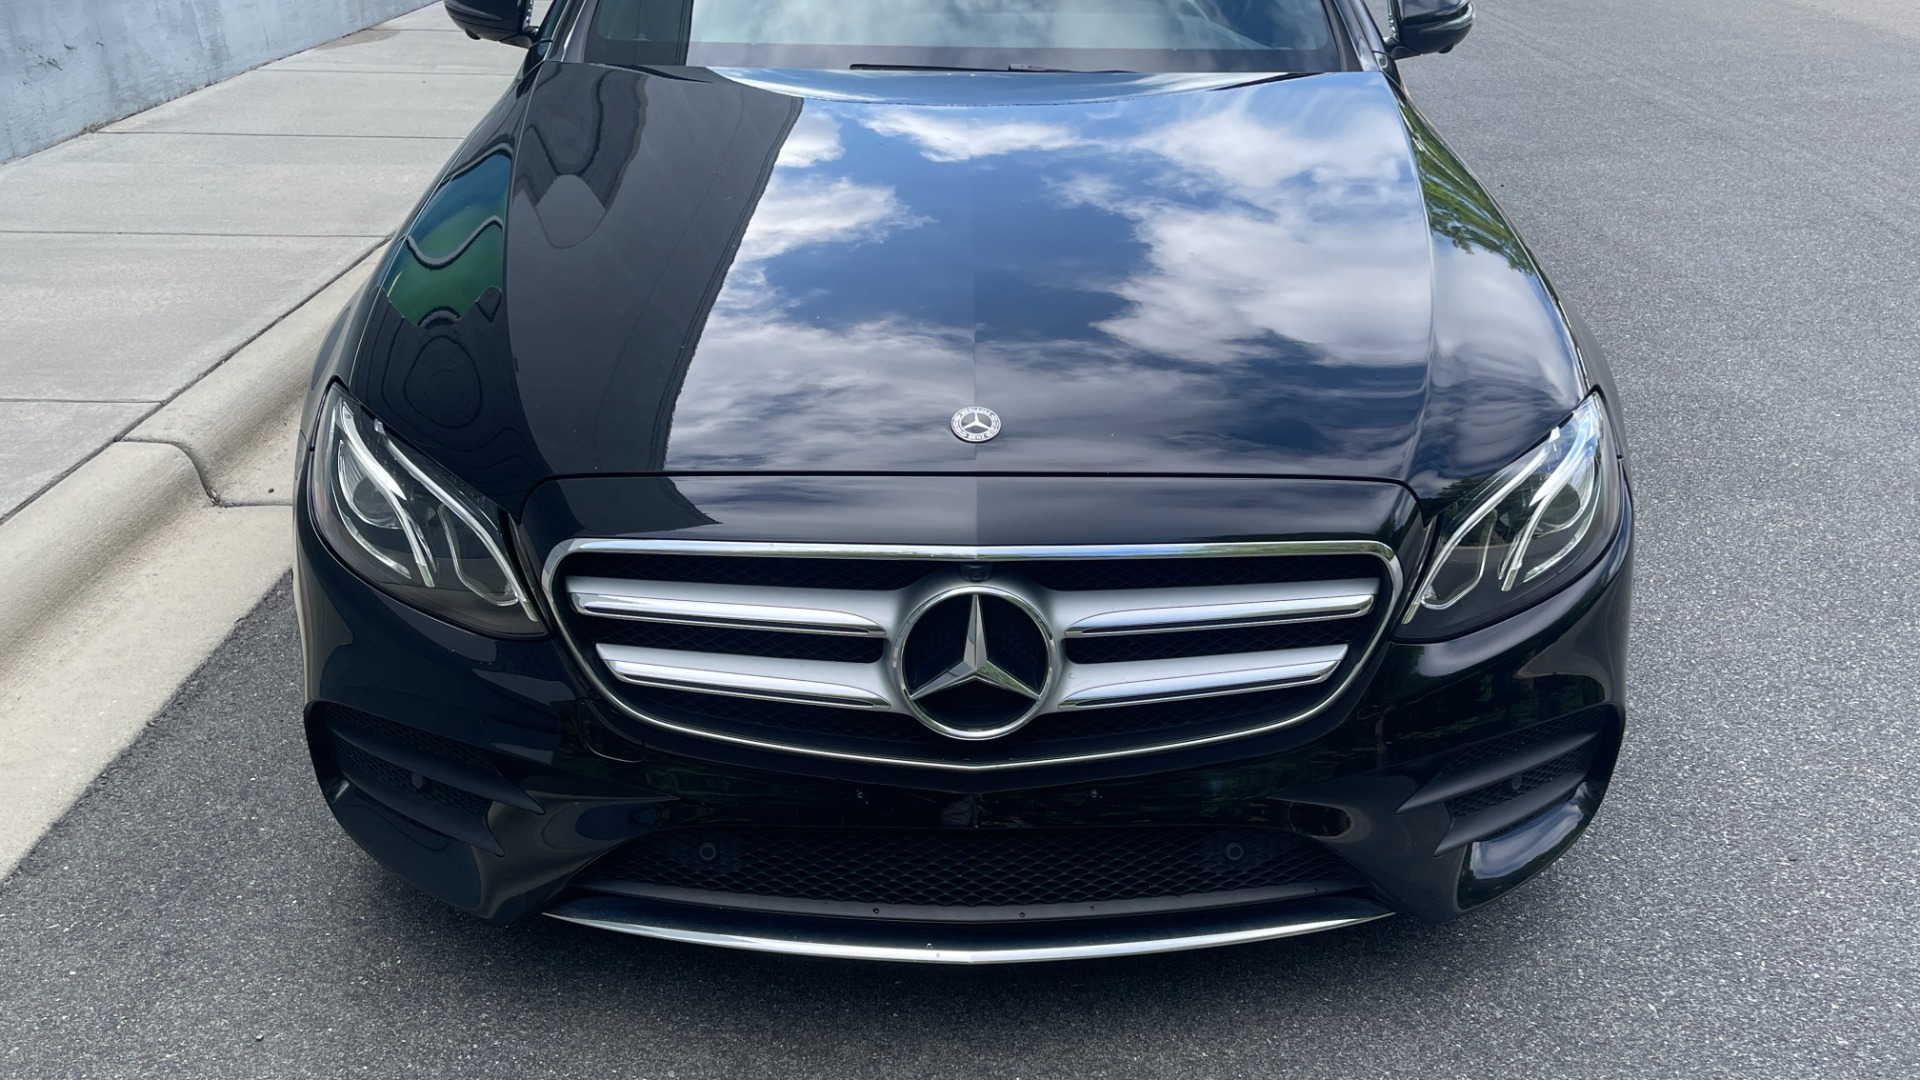 Used 2020 Mercedes-Benz E-Class E 350 / 4MATIC / AMG LINE / BURMESTER SOUND / PANORAMIC ROOF for sale Sold at Formula Imports in Charlotte NC 28227 24